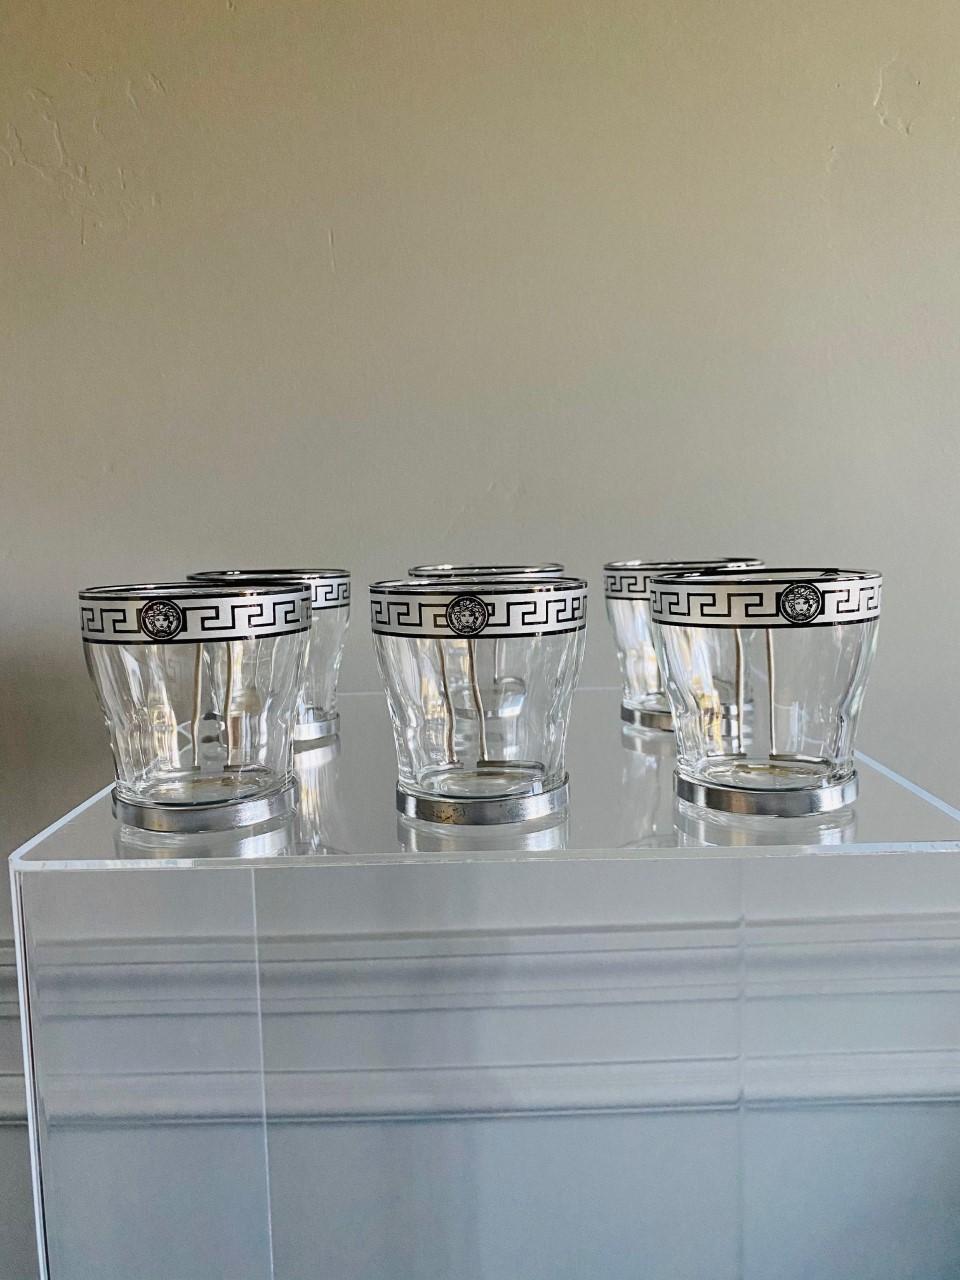 Stylish set of 6 glass espresso cups with stainless steel handle. 3.5 ounce capacity each. The Bormioli Rocco Oslo design makes them a Classic. The Greek key design with the Medusa medallion in silver transforms these cups into a chic statement.